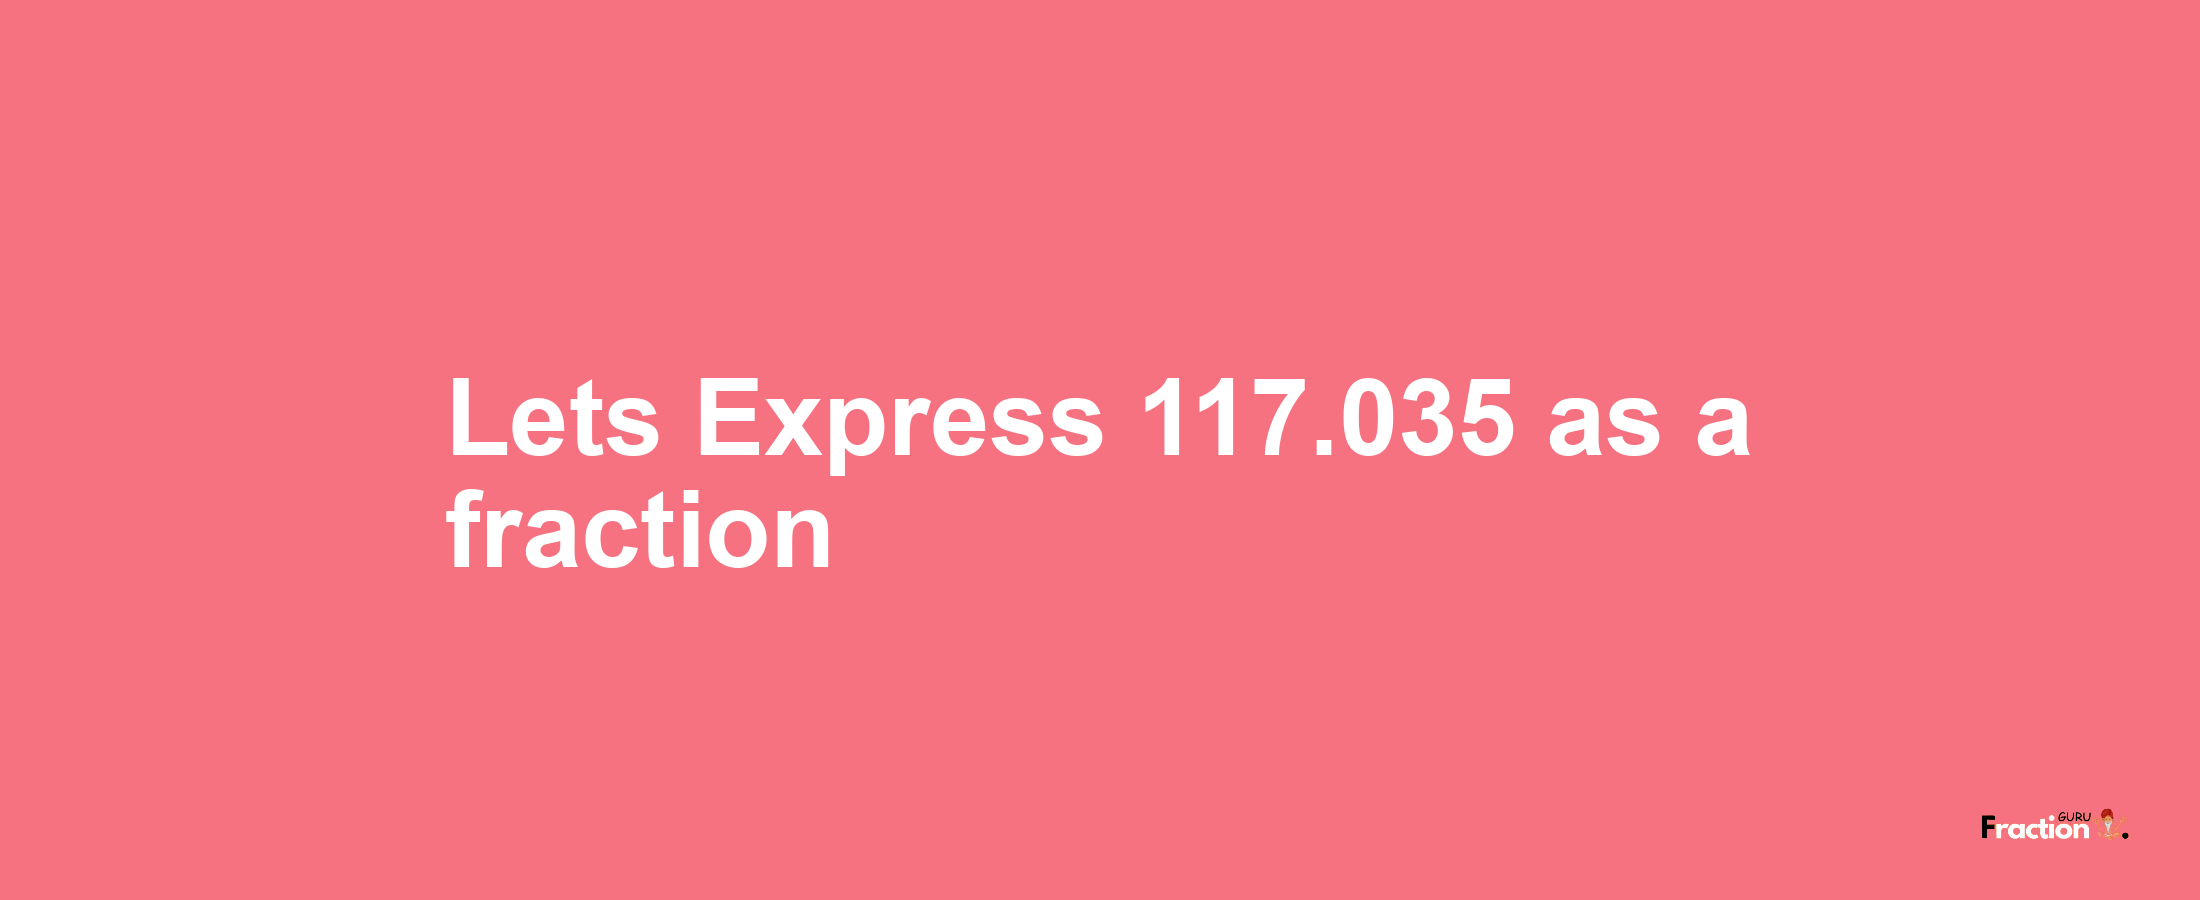 Lets Express 117.035 as afraction